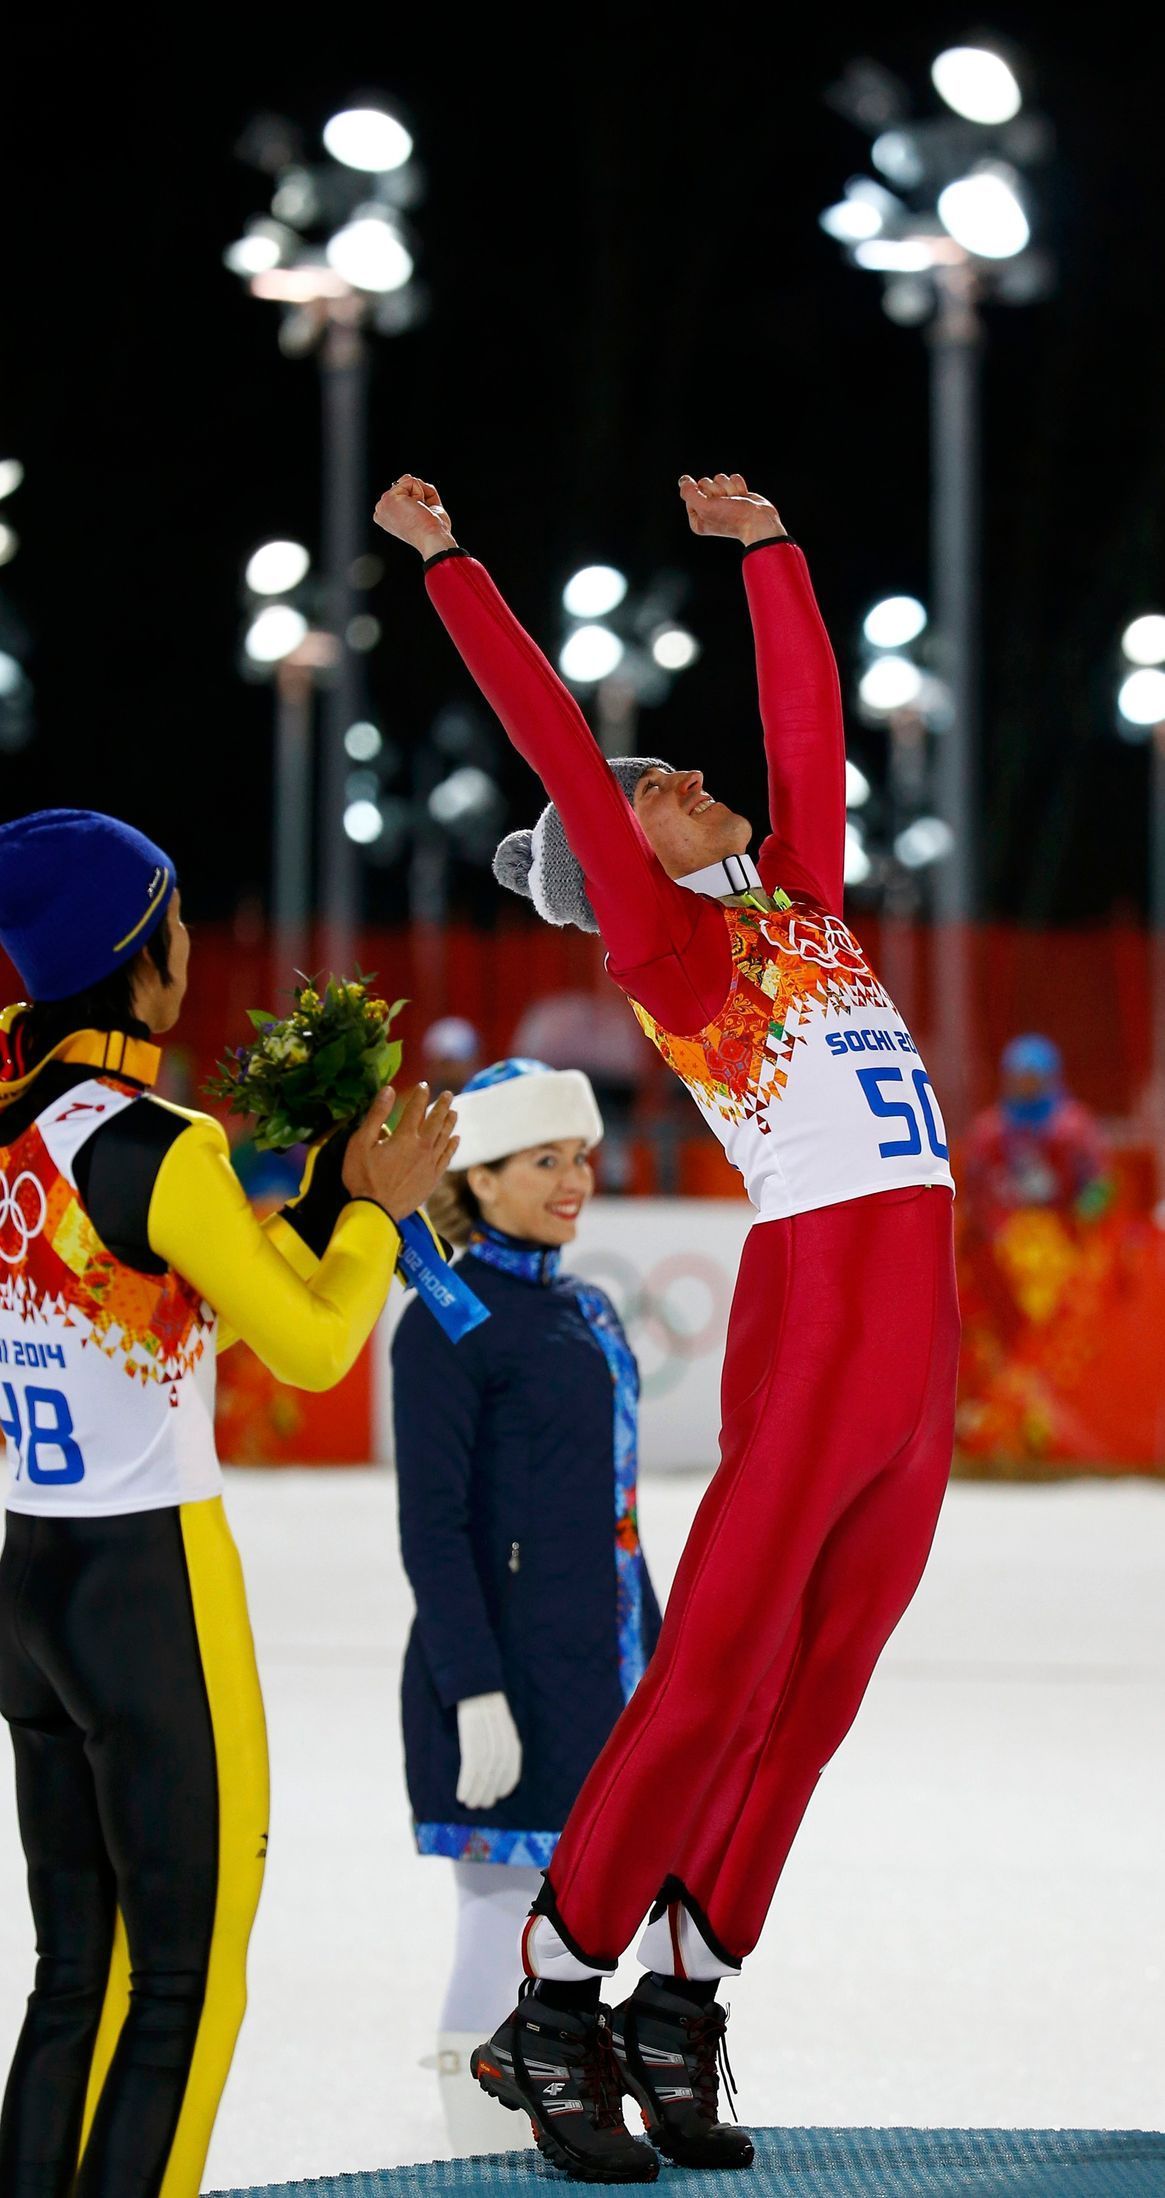 Winner Poland's Stoch is applauded by second-placed Japan's Kasai as he celebrates on the podium during the flower ceremony after his victory in the men's ski jumping individual normal hill final even